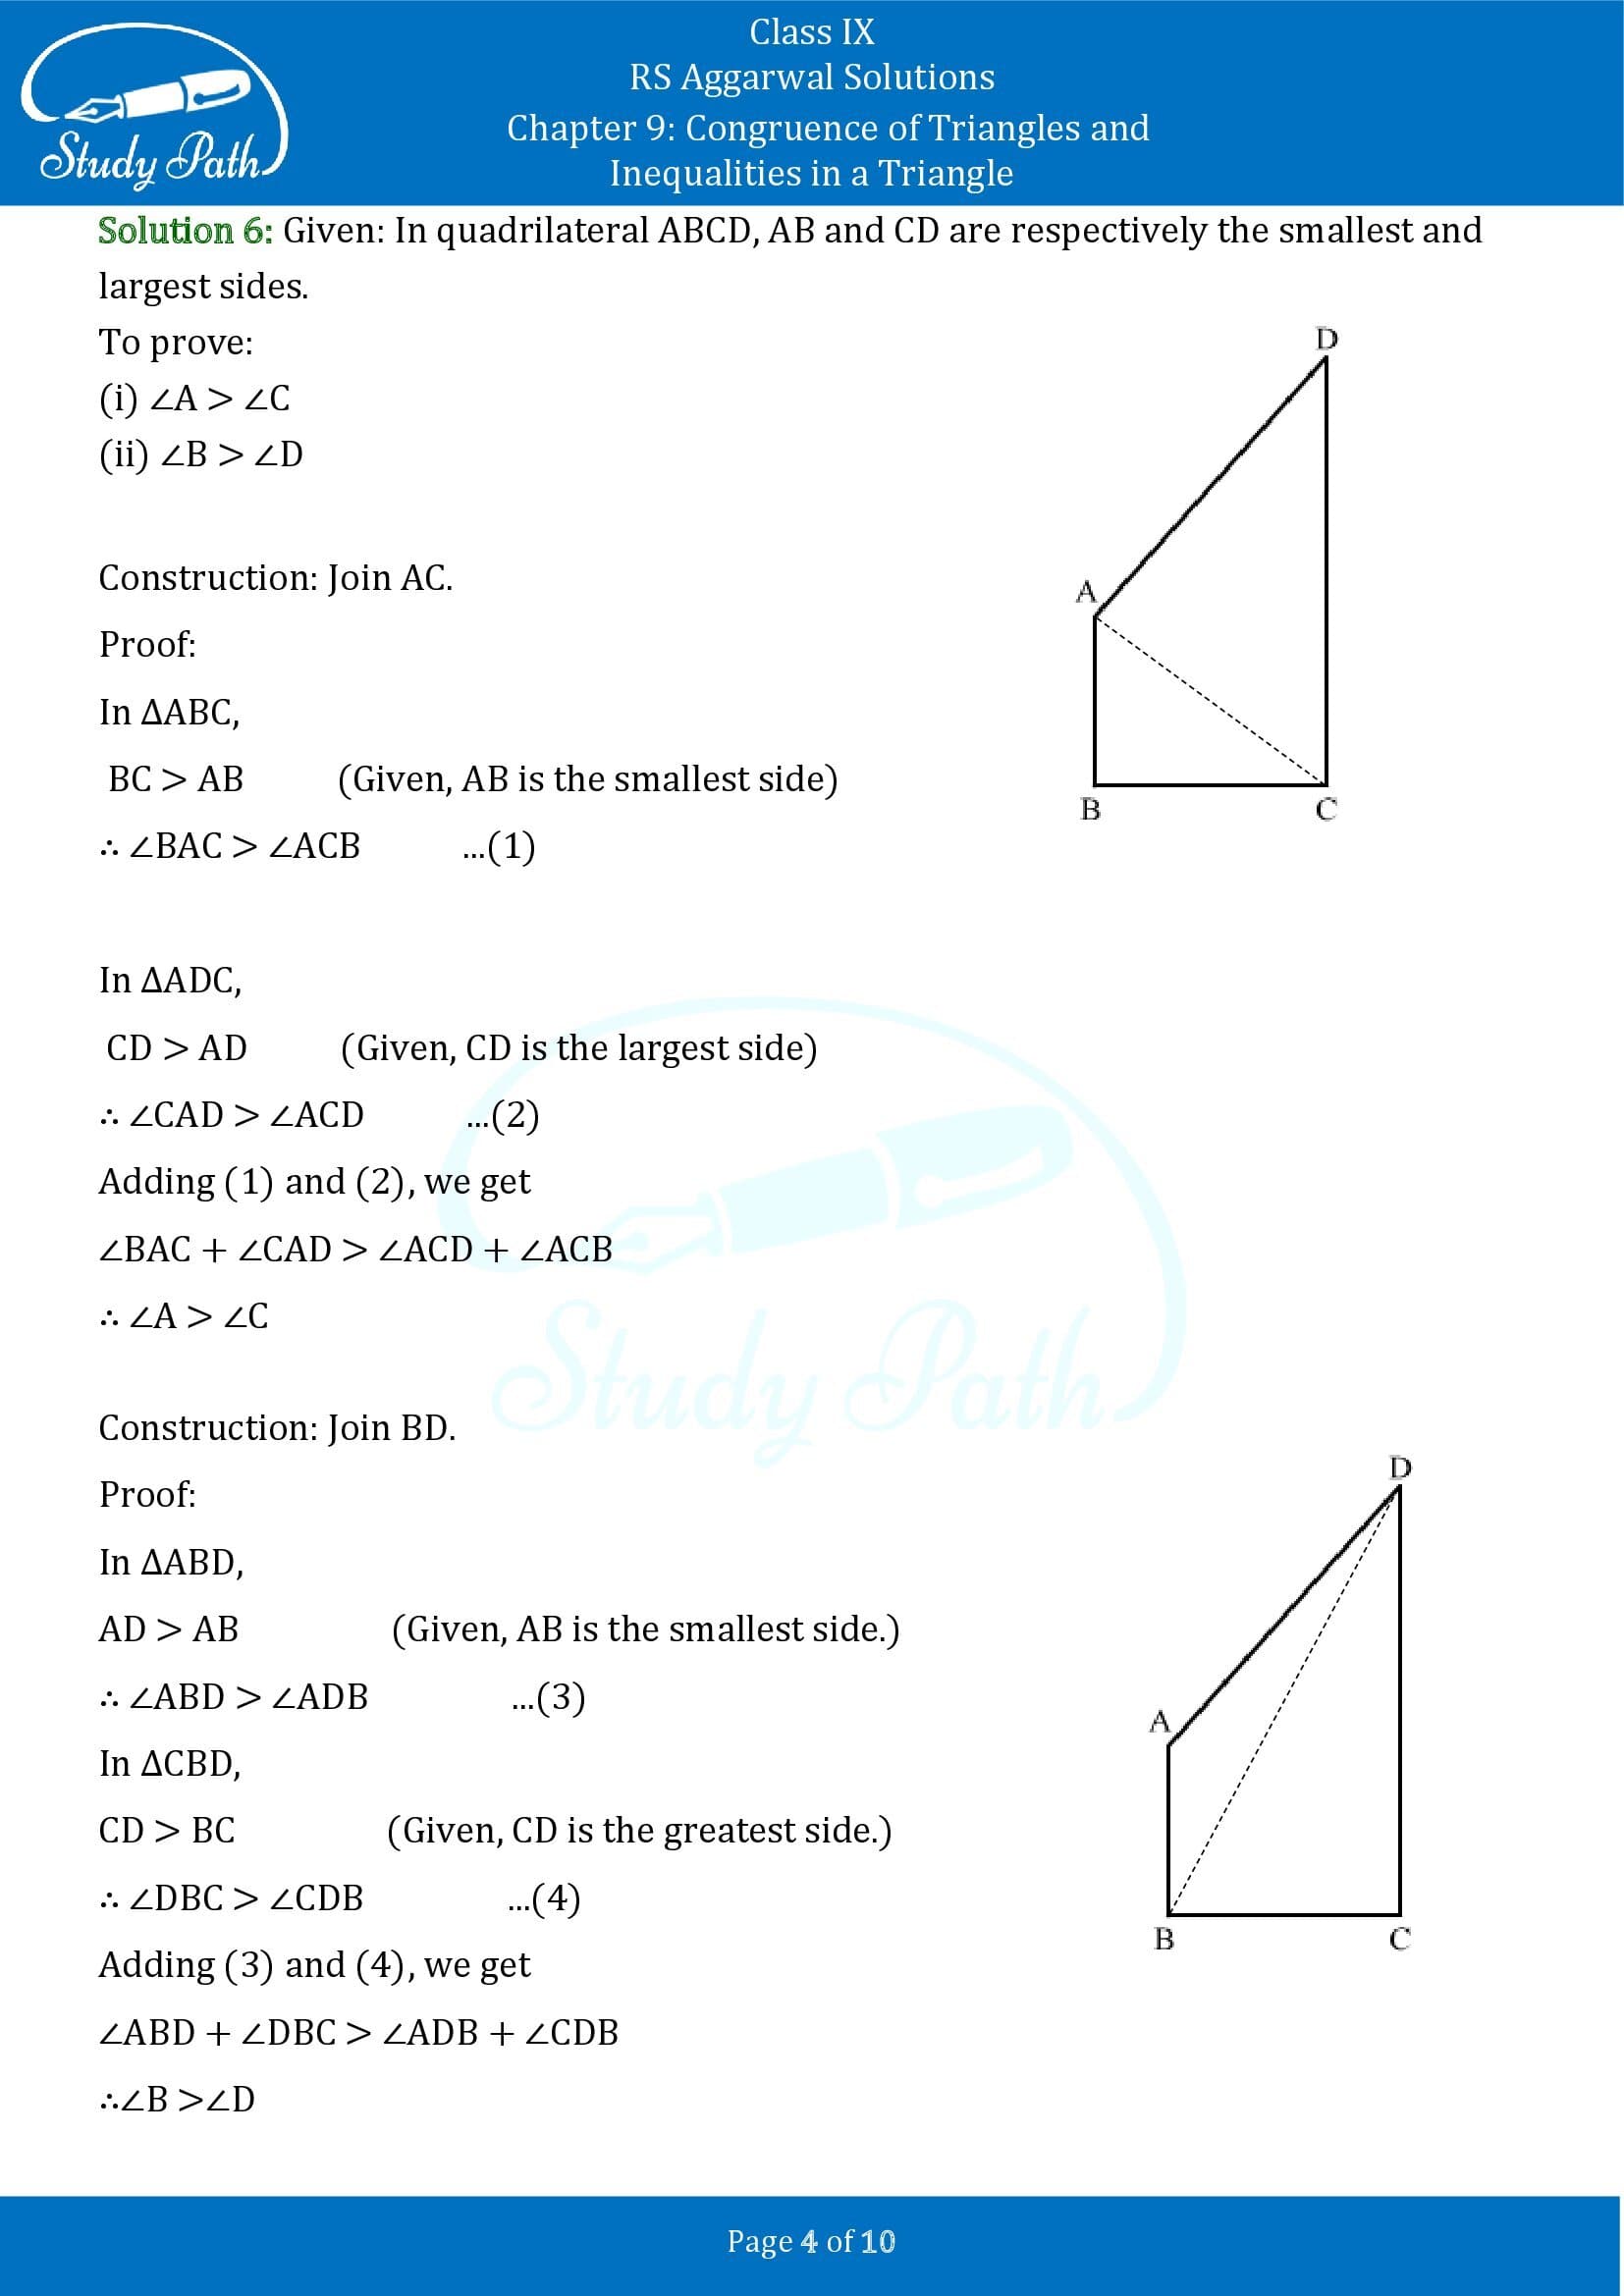 RS Aggarwal Solutions Class 9 Chapter 9 Congruence of Triangles and Inequalities in a Triangle Exercise 9B 0004